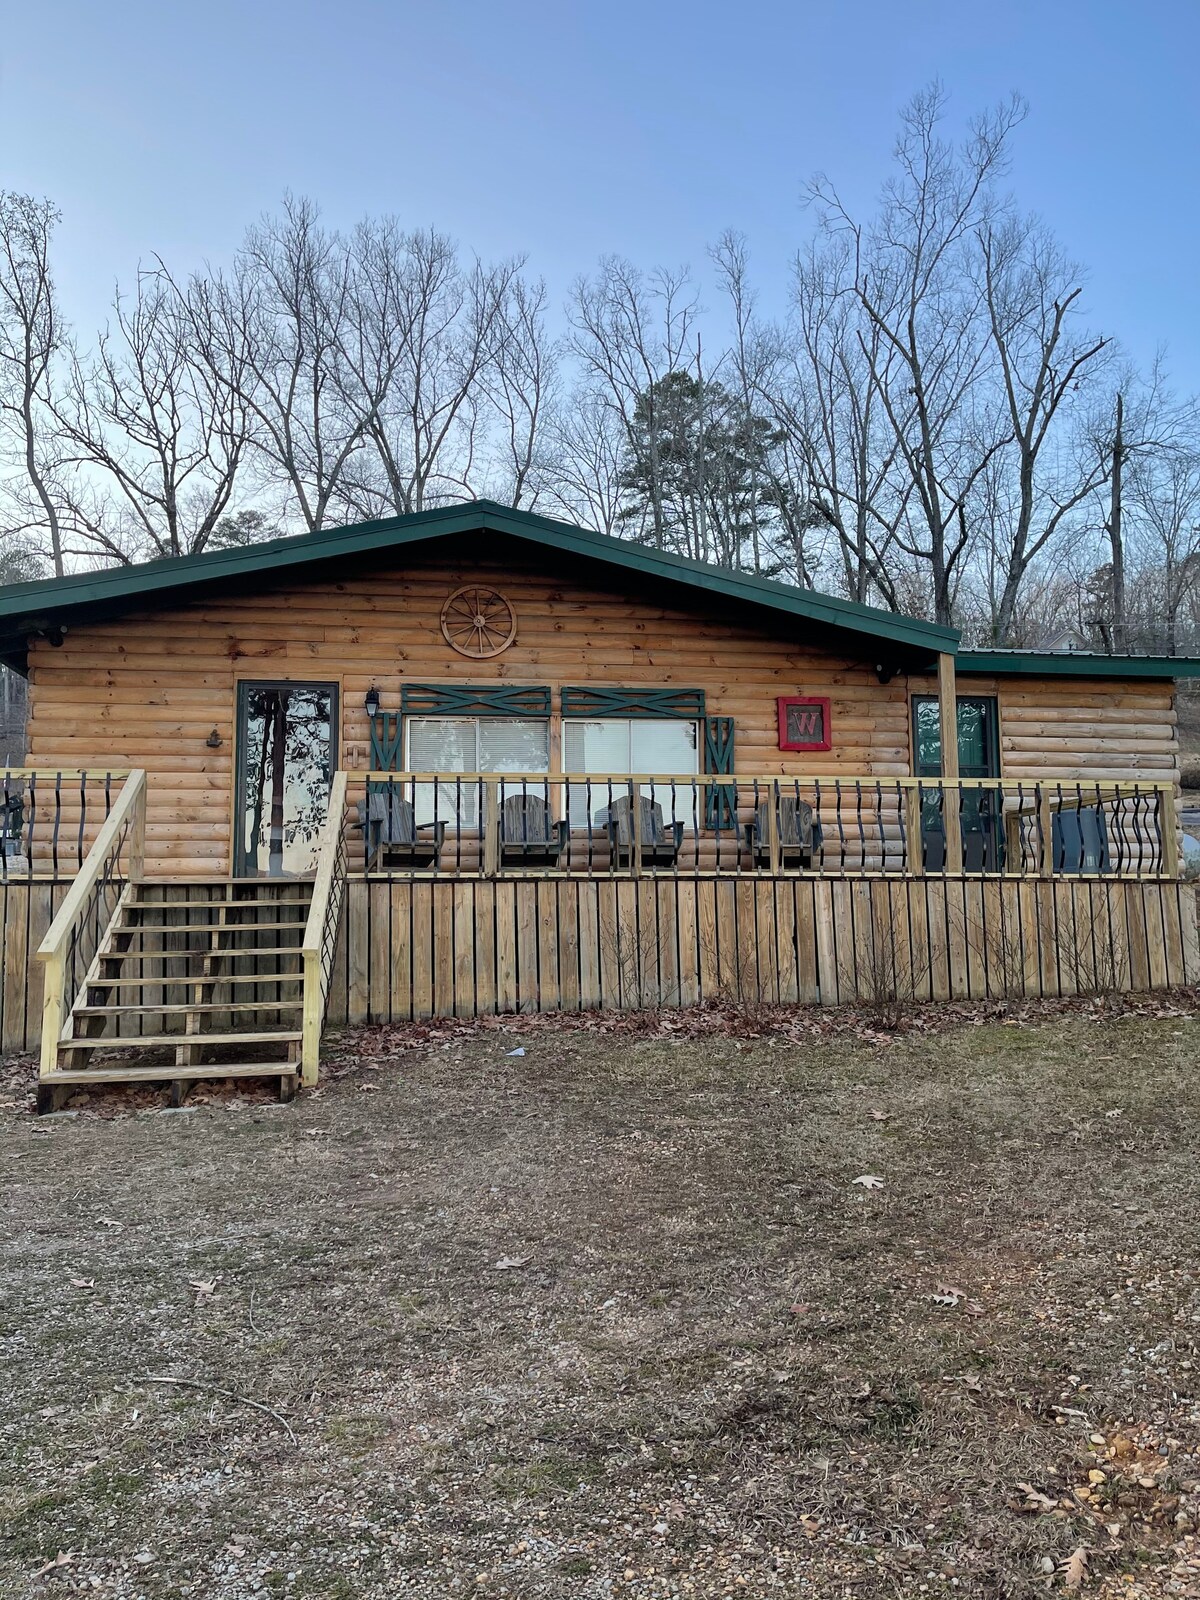 Jerry 's River Front Cabin